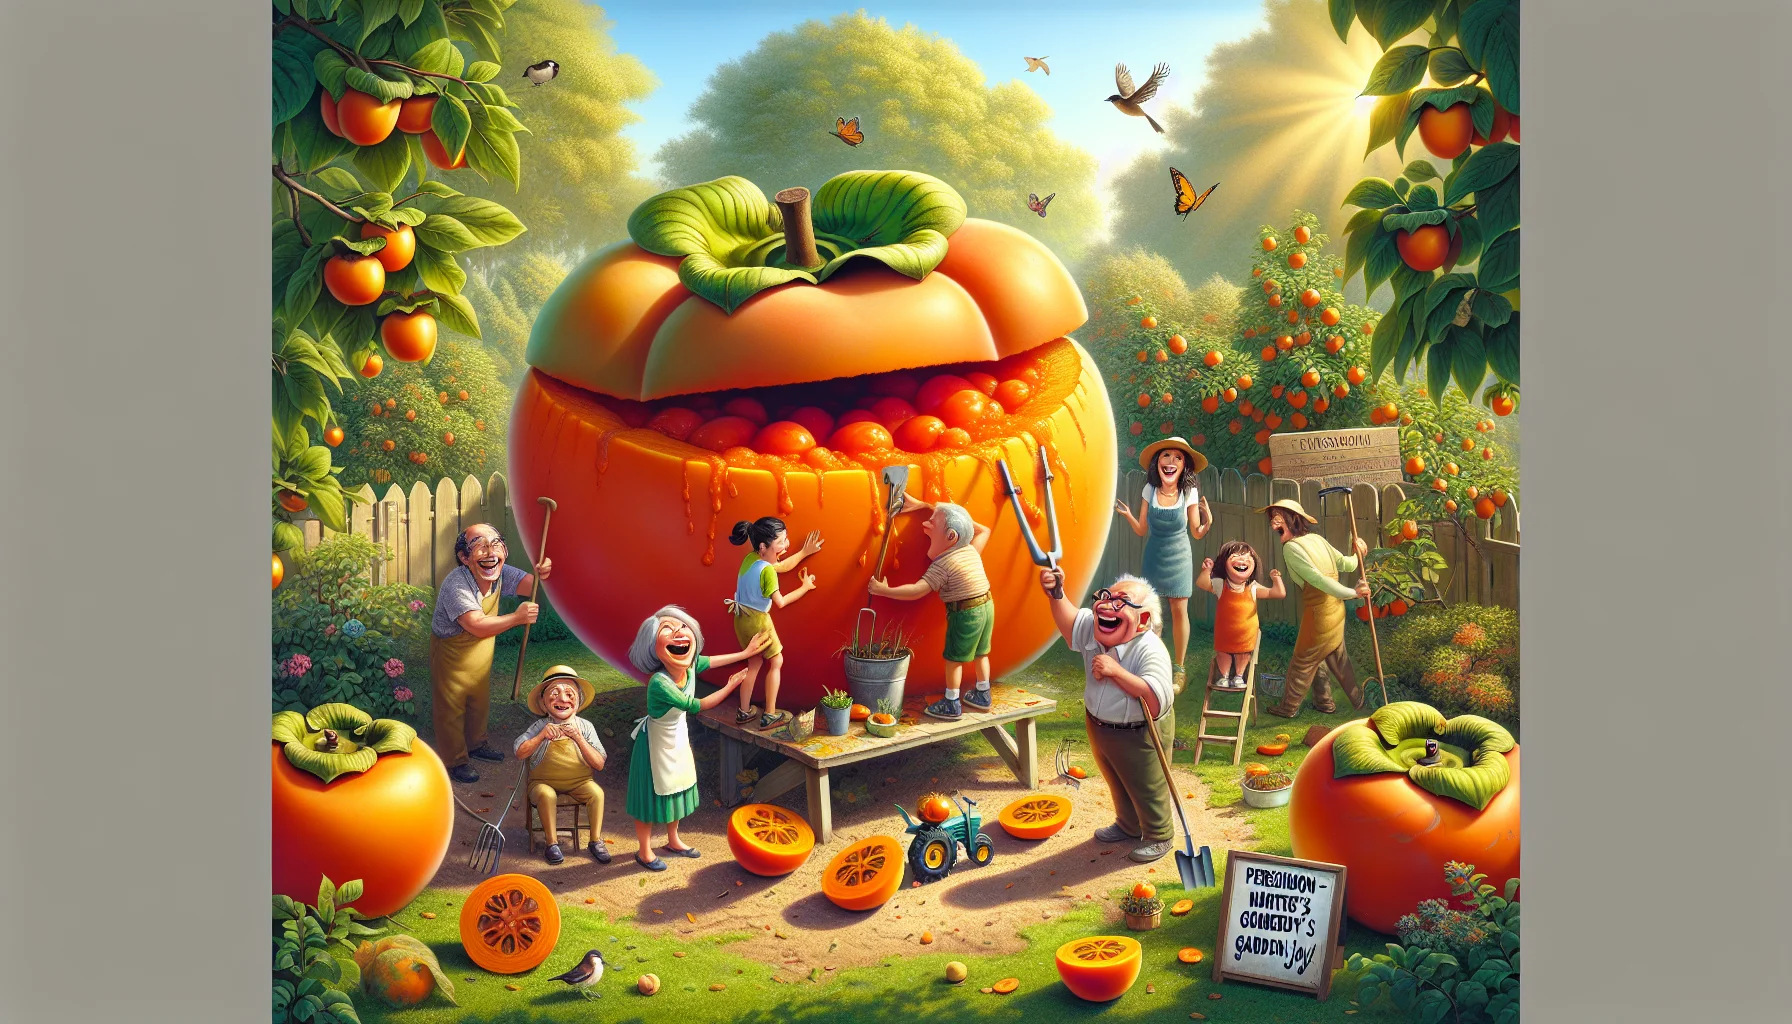 Imagine a humorous scenario in a lush green garden, where giant ripe persimmons have just burst open revealing their vibrant orange pulp. In this charming and inviting scene, laughter bubbles up as a group of adults and children of diverse descents joyfully engage in gardening activities. They curiously and playfully explore the oversized persimmon pulp with their garden tools. Birds chirp overhead, butterflies flutter around, and the sun lazily filters through the leafy trees, bathing the garden in a warm, golden glow. A sign hangs nearby reading: 'Persimmons - Nature’s Comedy, Garden’s Joy!'. This whimsically realistic scene makes the joy of gardening palpable.